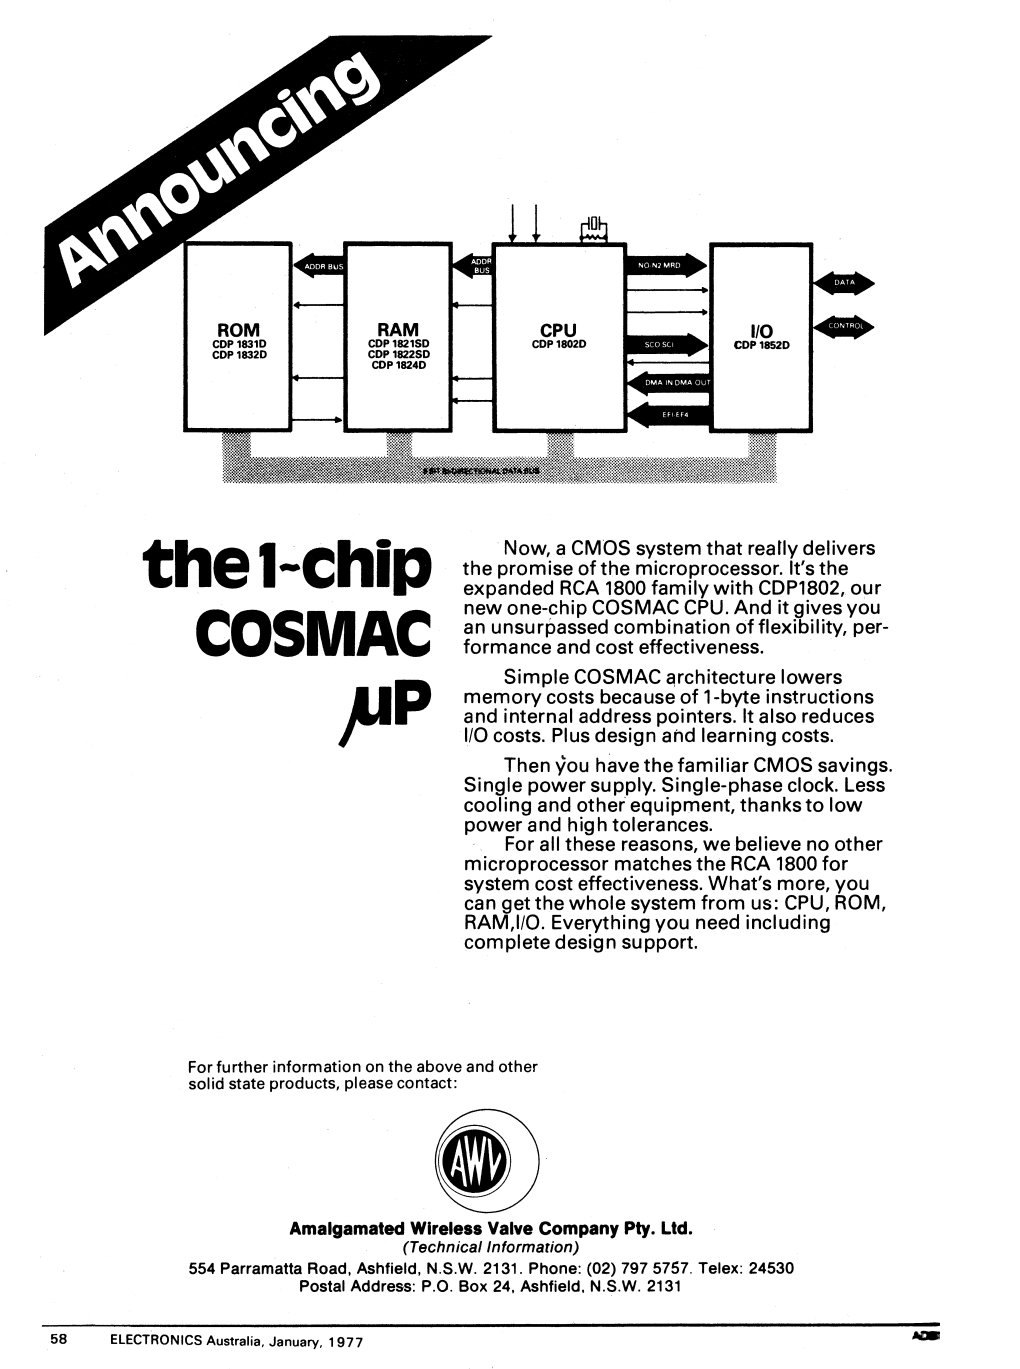 RCA COSMAC VIP COMPUTERS Generating Displays and Interfacing with the Keypad Etc, Plus 16 General Purpose "Variables"